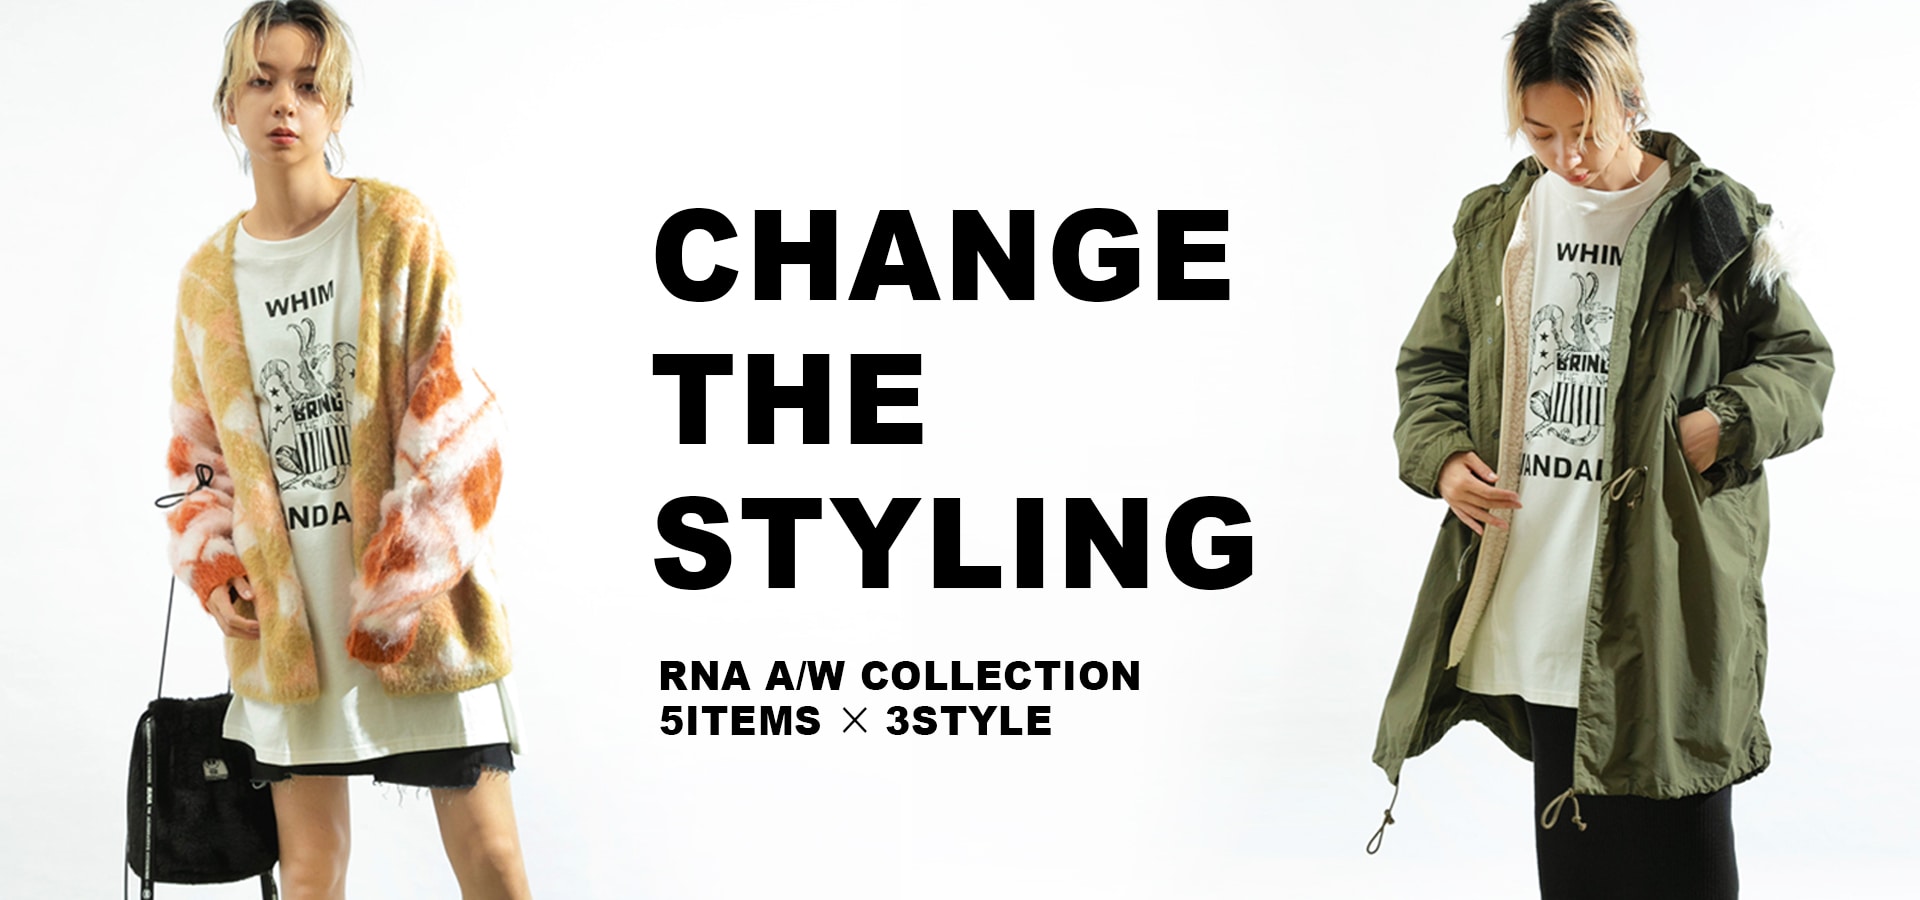 RNA CHANGE THE STYLING